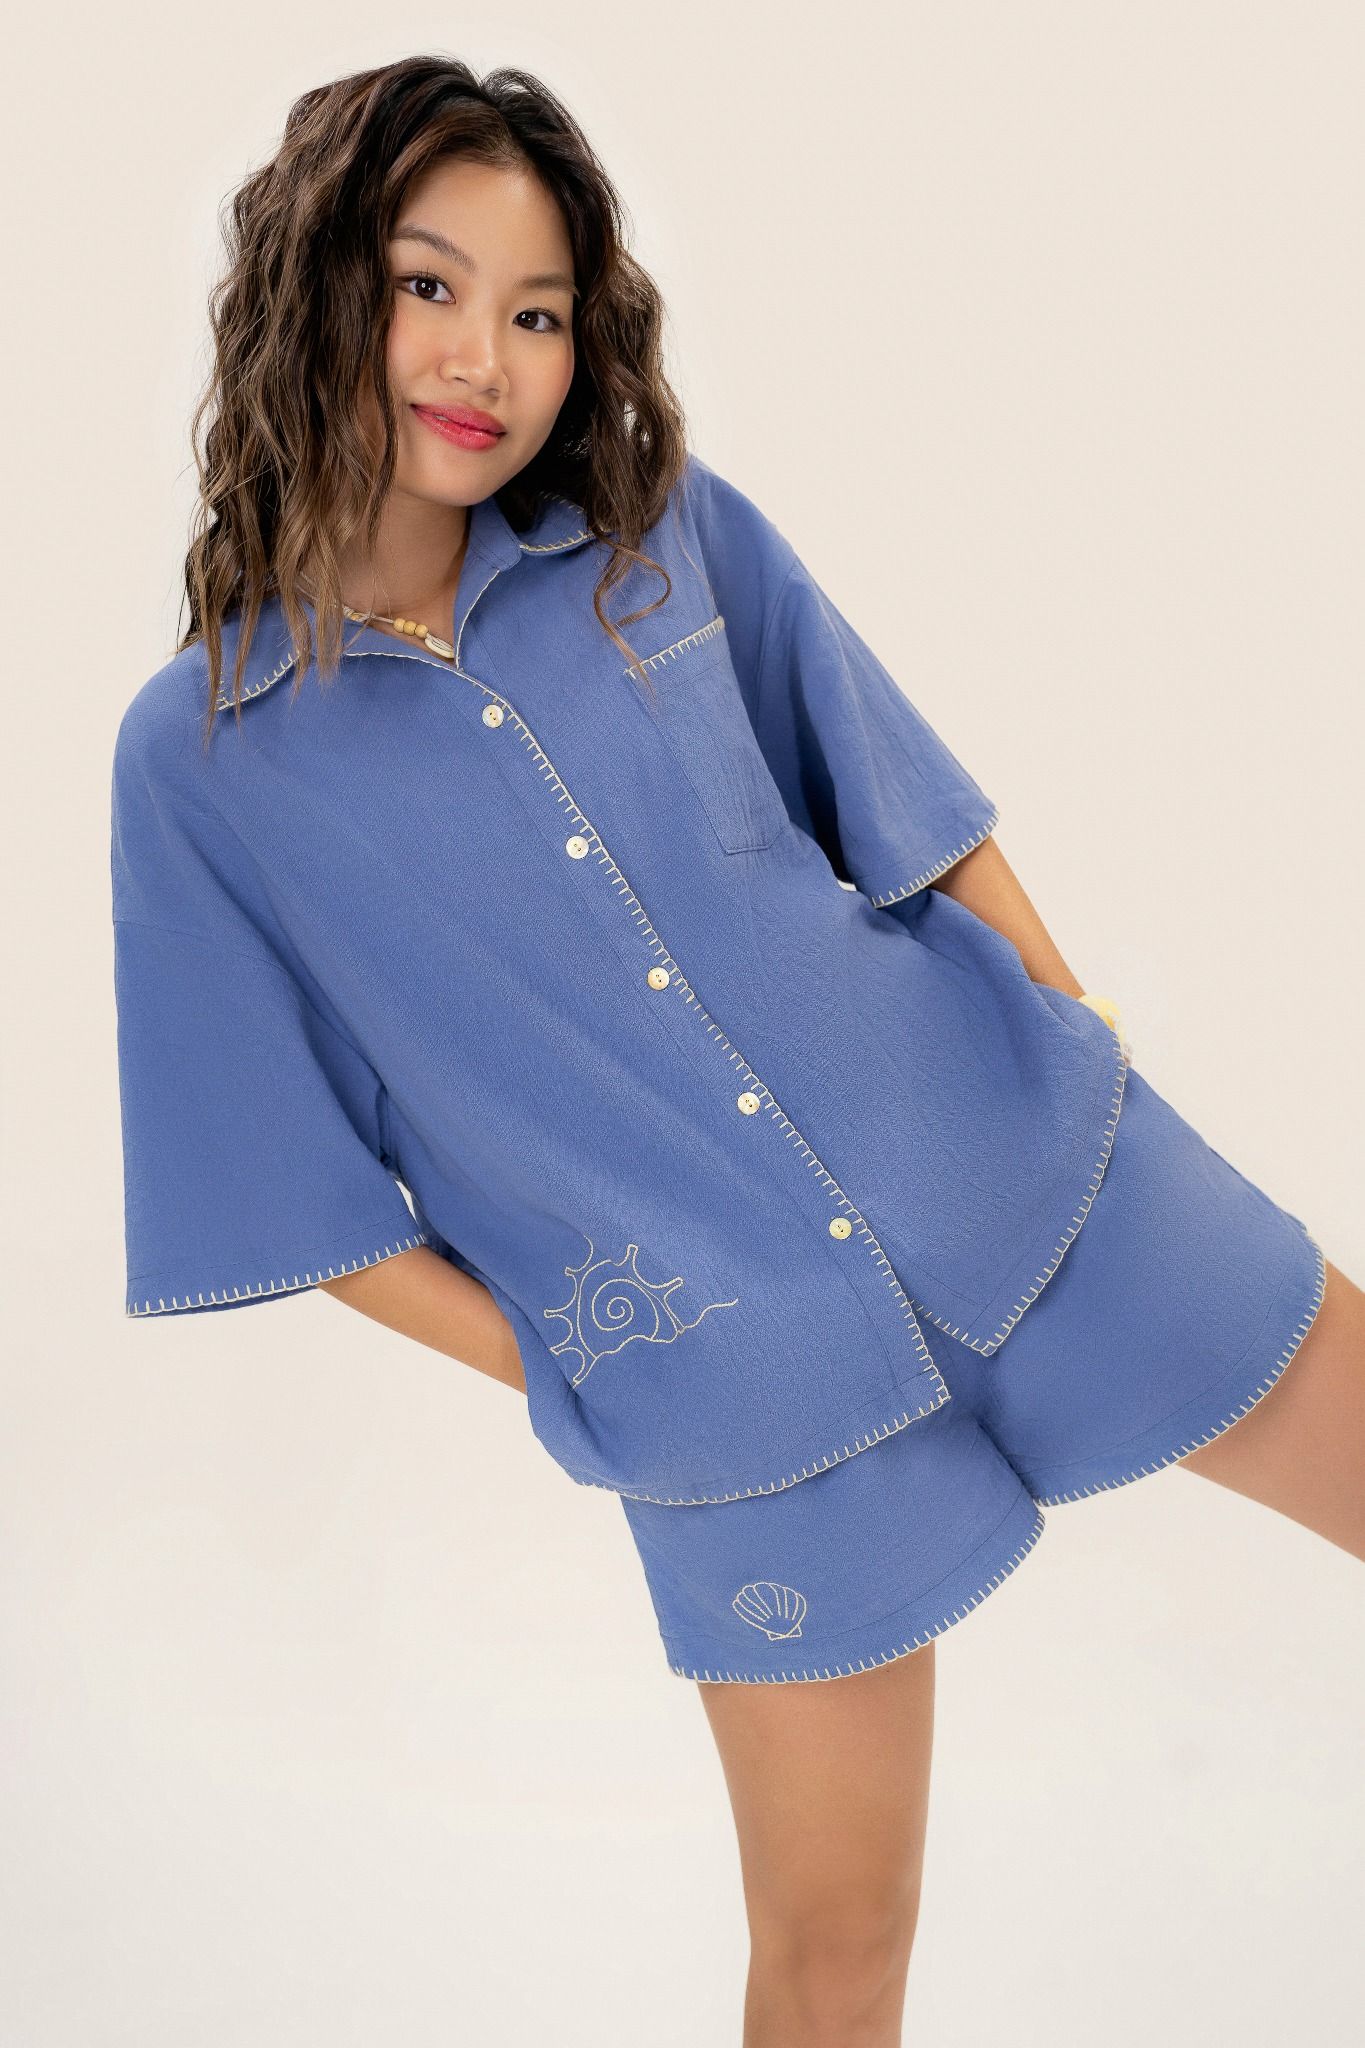  Blue Waves Embroidered Short Sleeve Shirt 